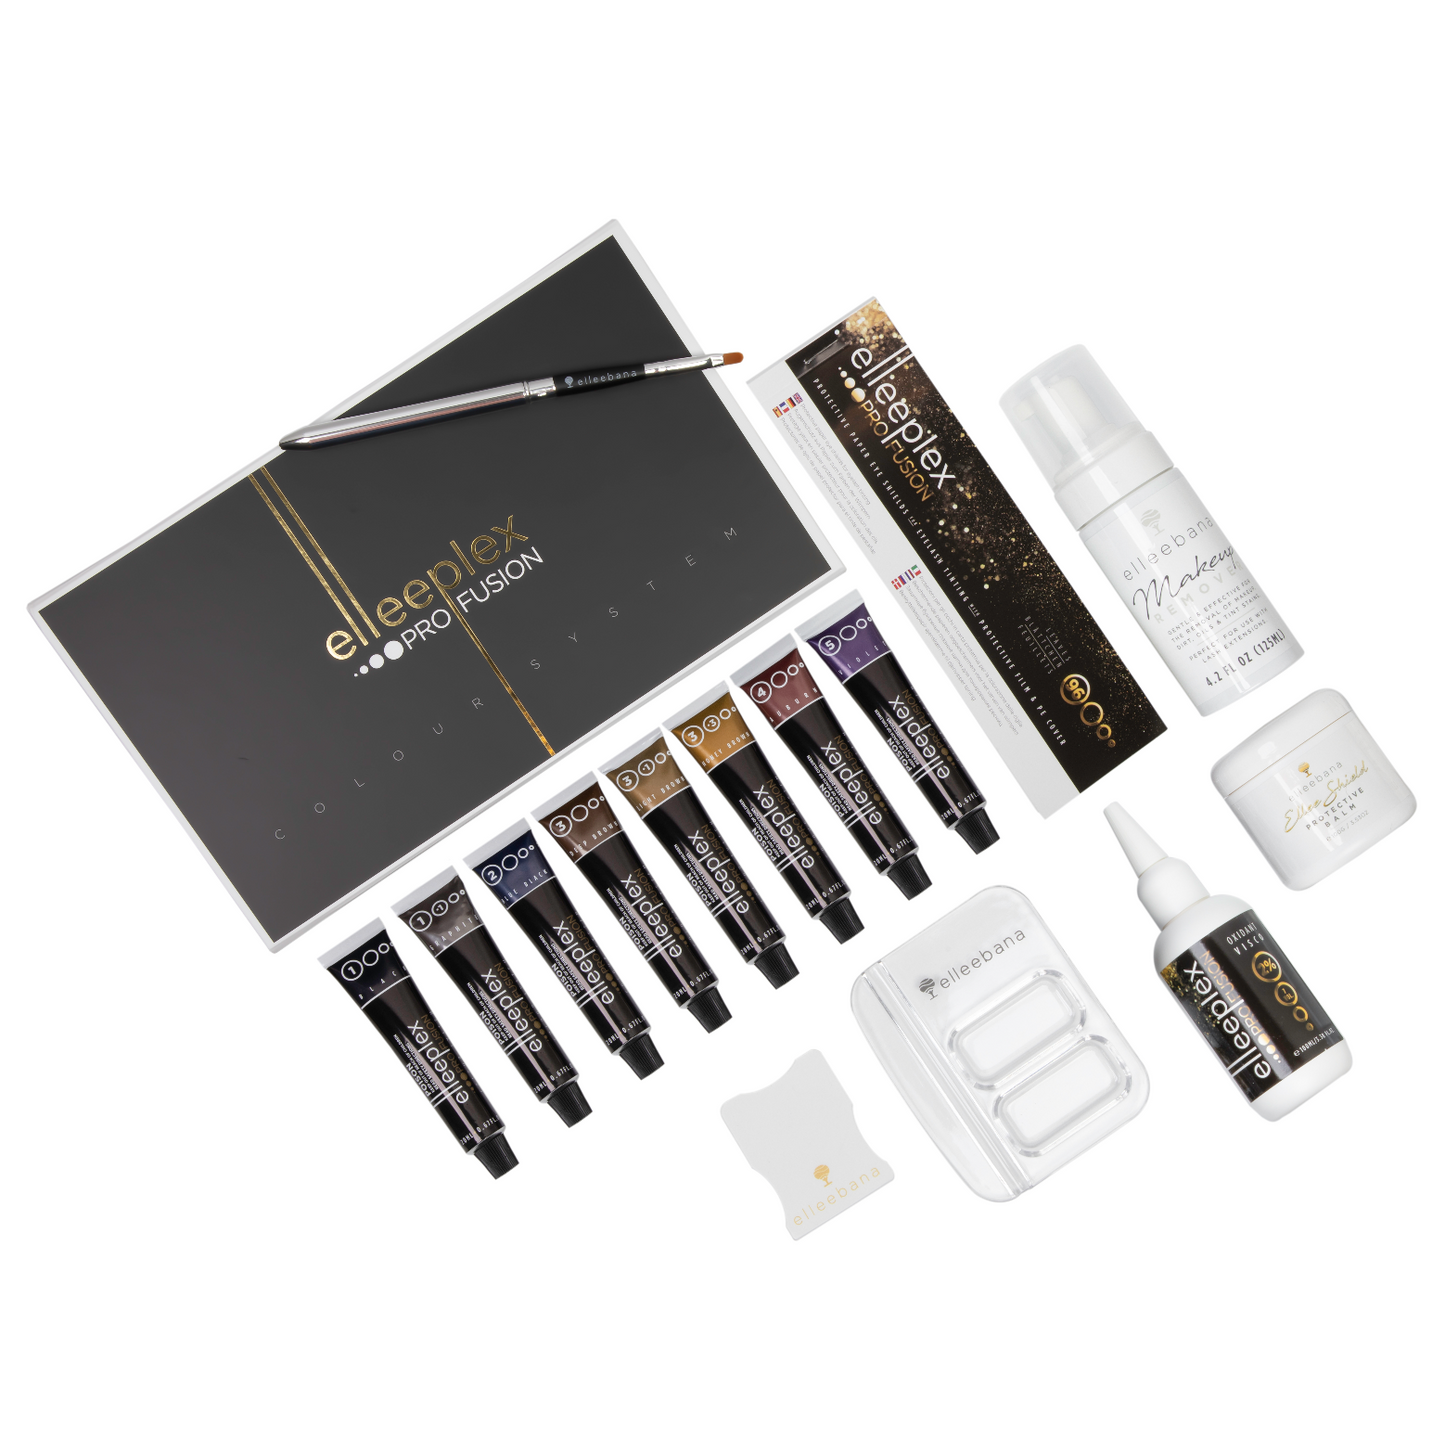 Elleeplex ProFusion Lash and Brow TINT kit (8 x colours) All you need